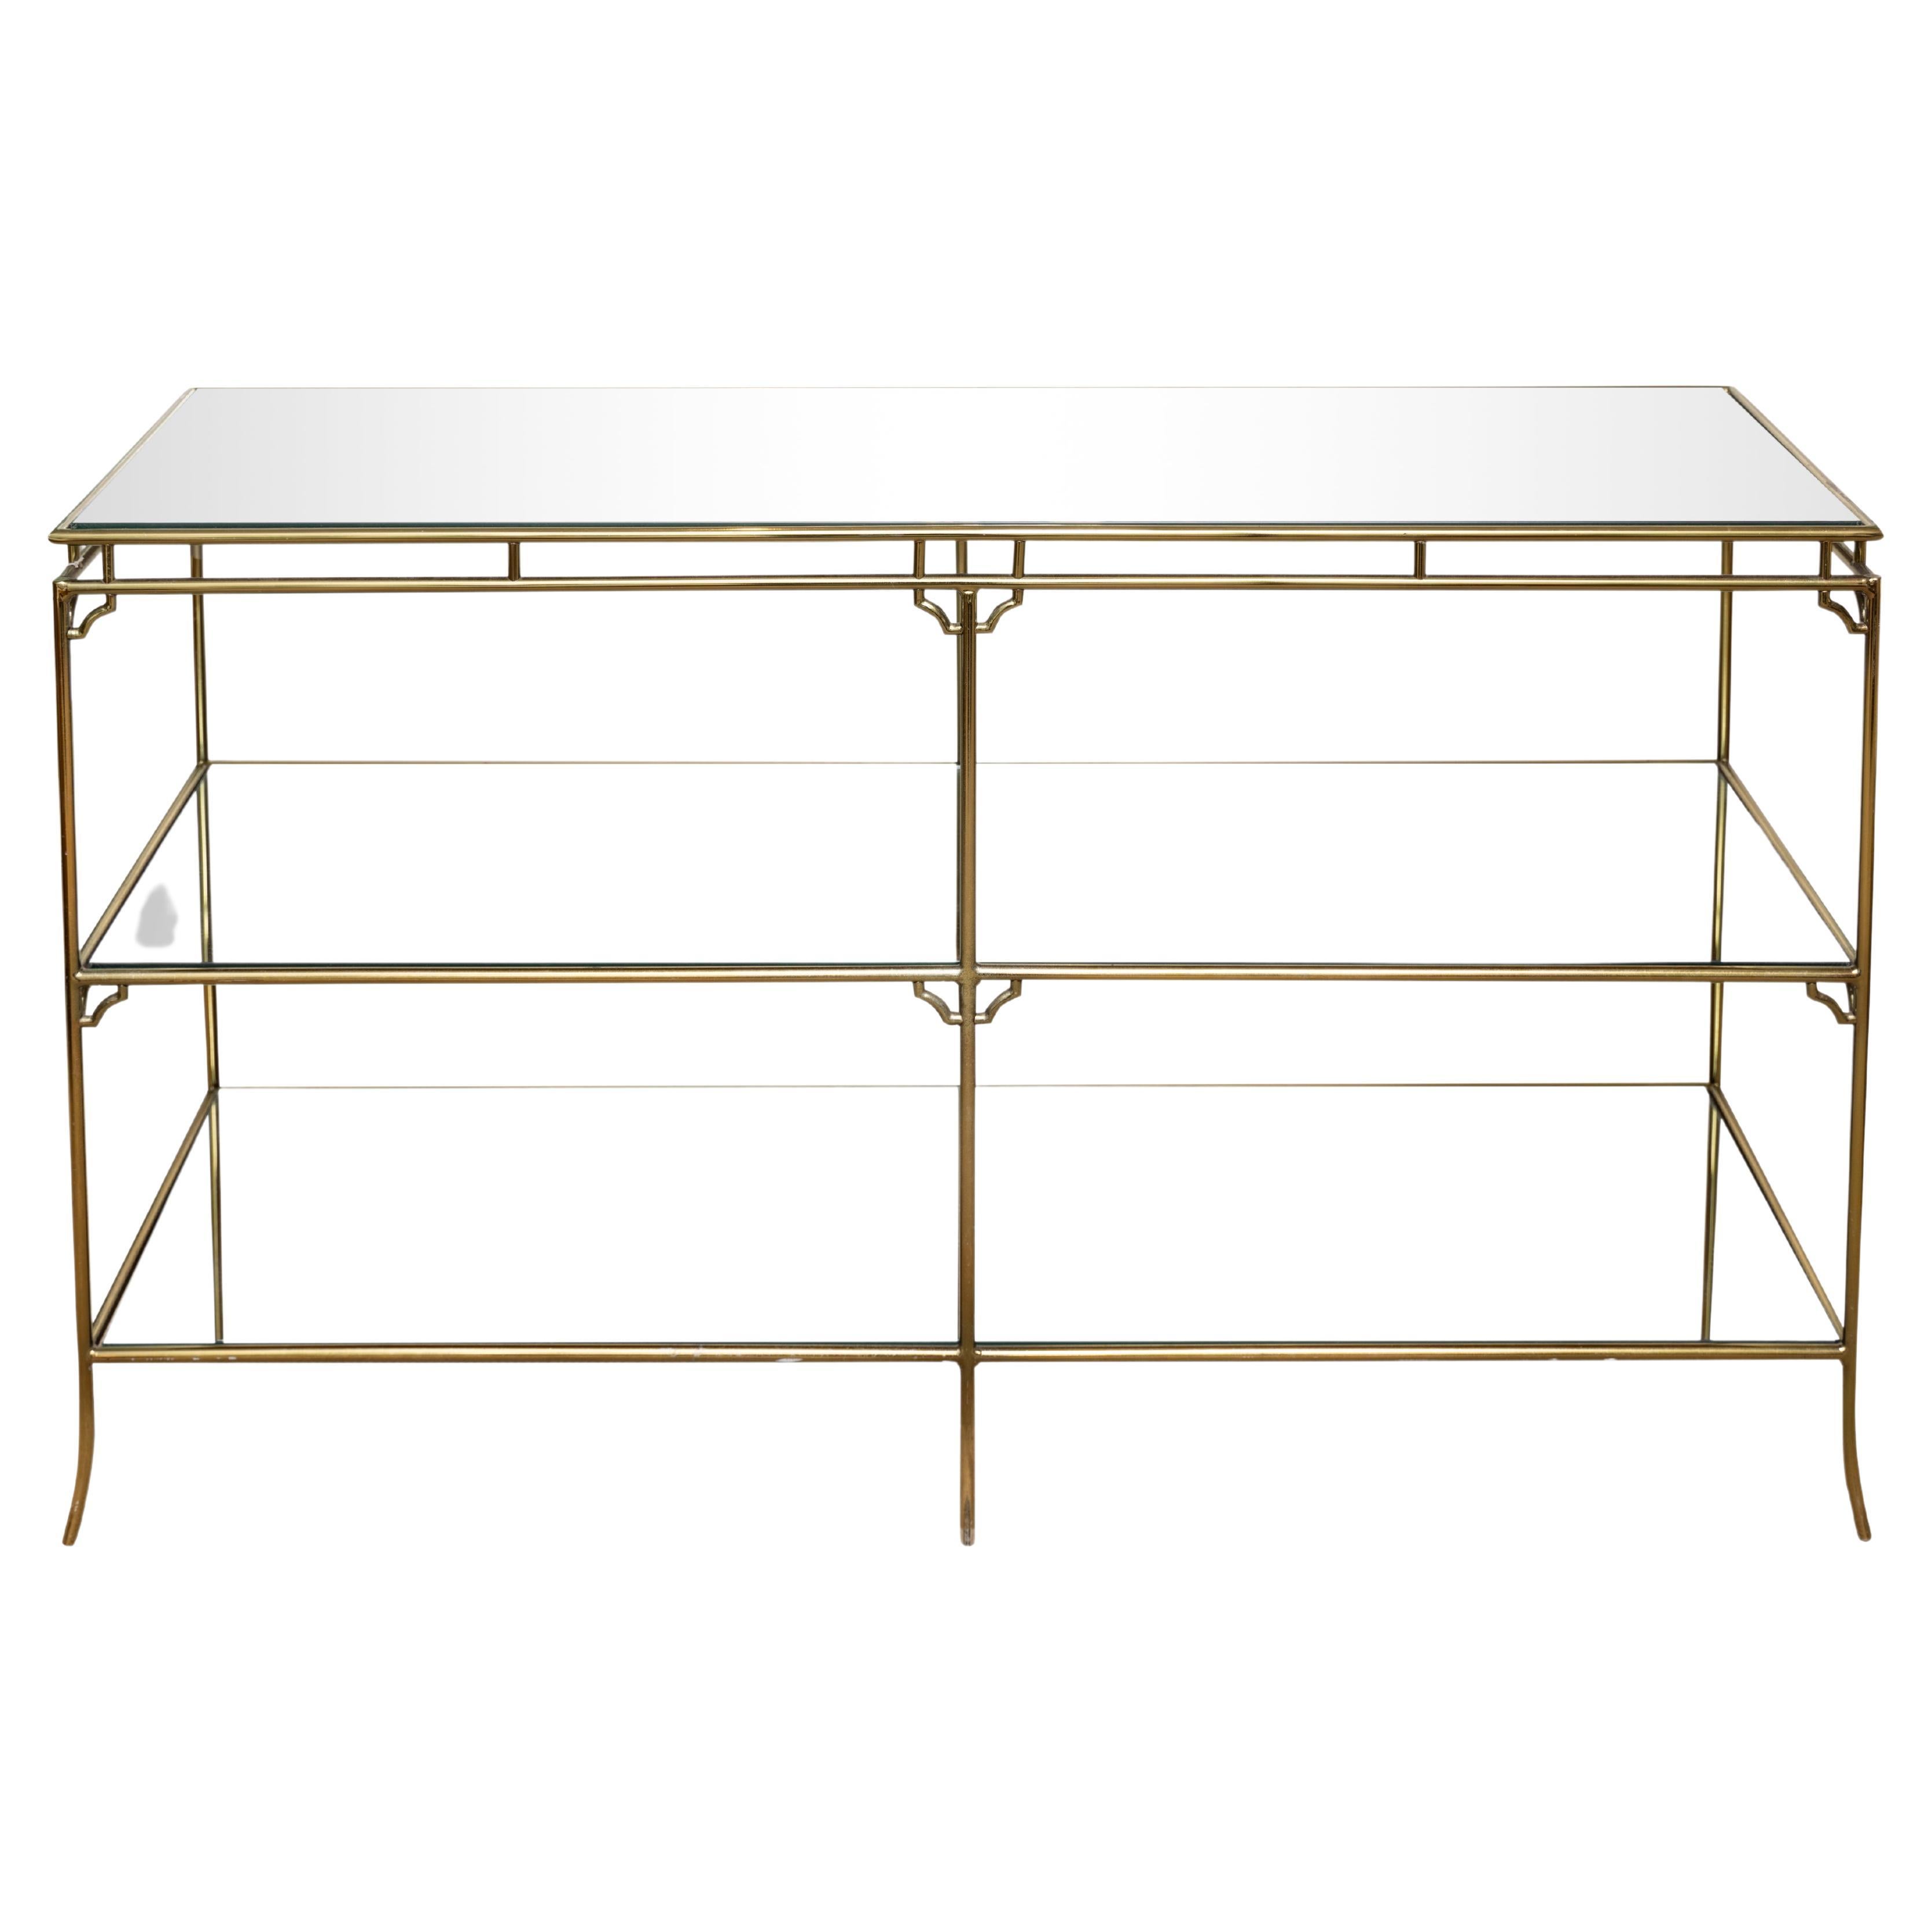 Vintage Midcentury Three Tier Brass Bamboo Console with Mirrored Shelves